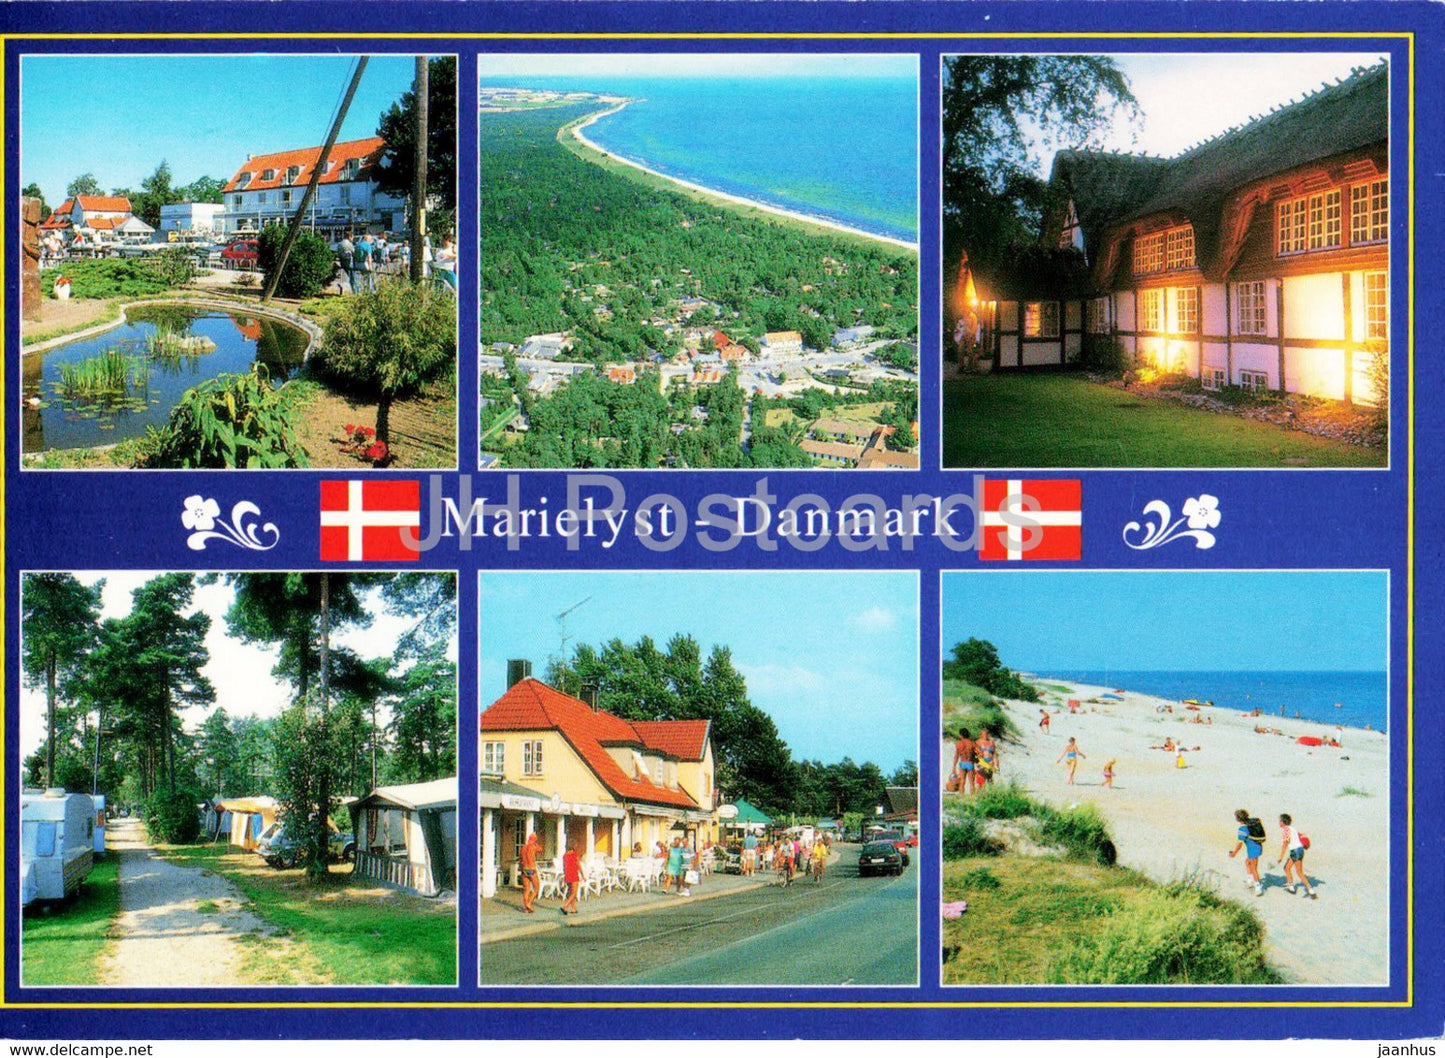 Marielyst - town views - beach - multiview - 1995 - Denmark - used - JH Postcards